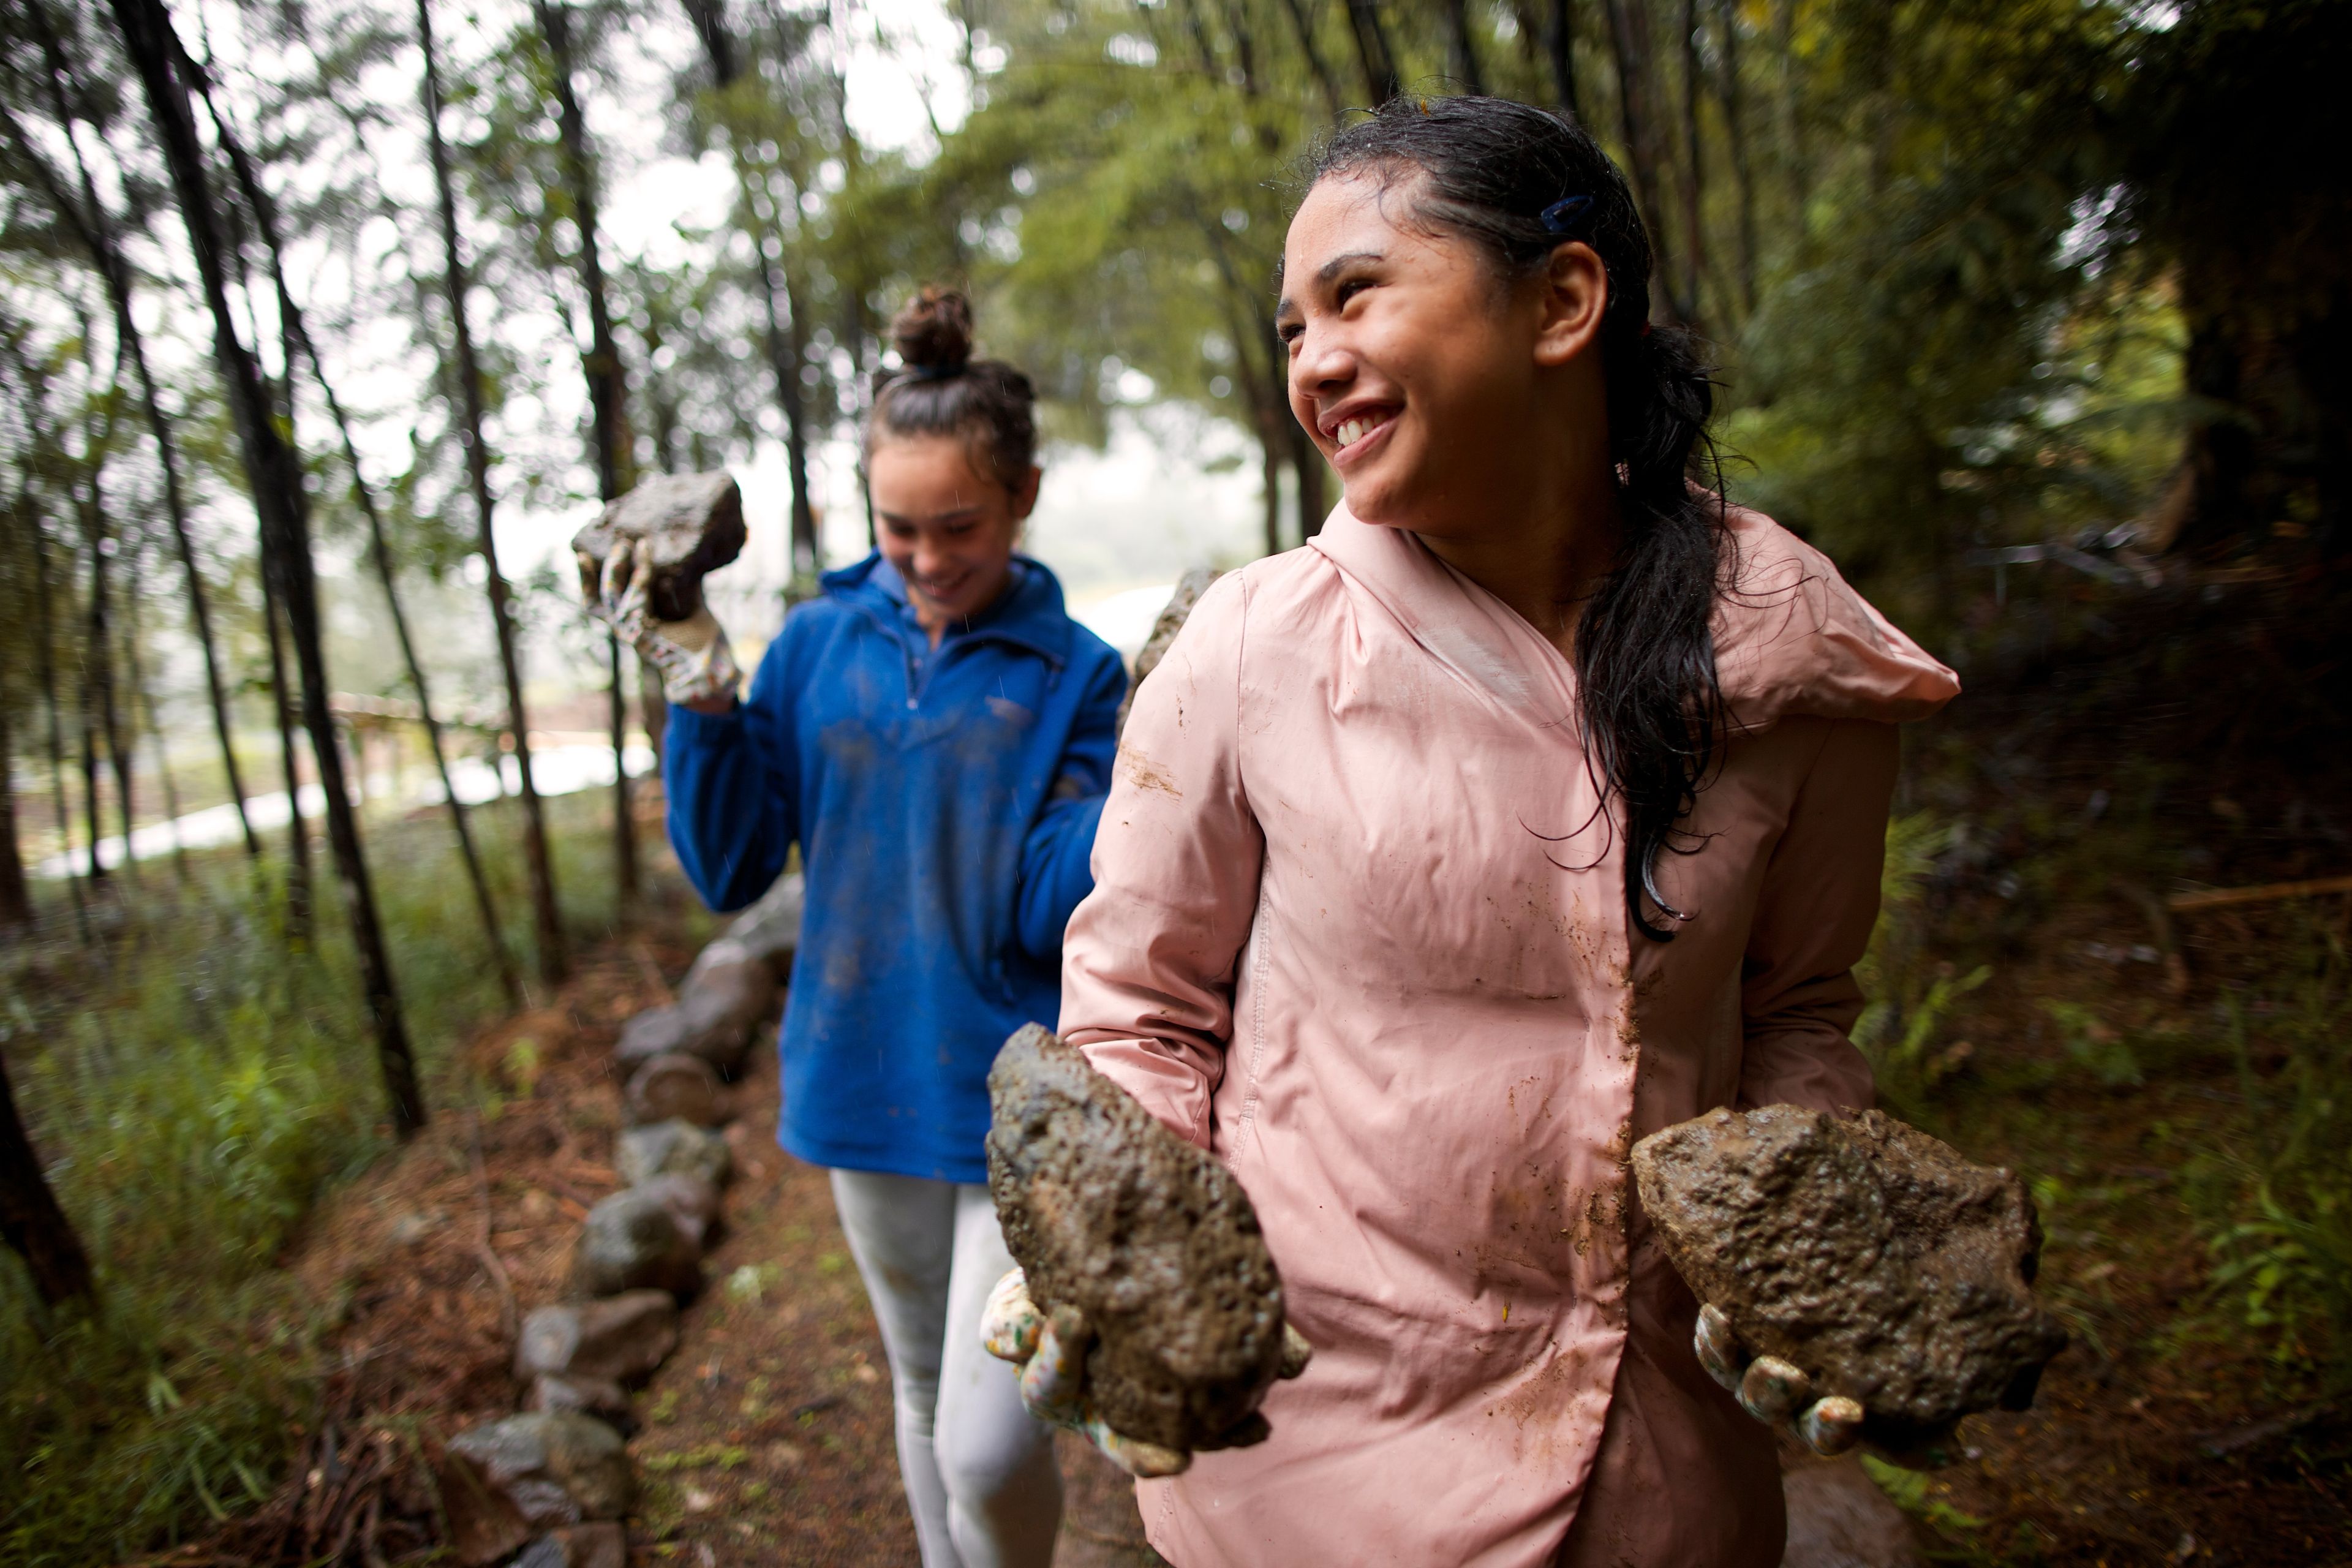 Two young women help lay rocks down to line a path.  